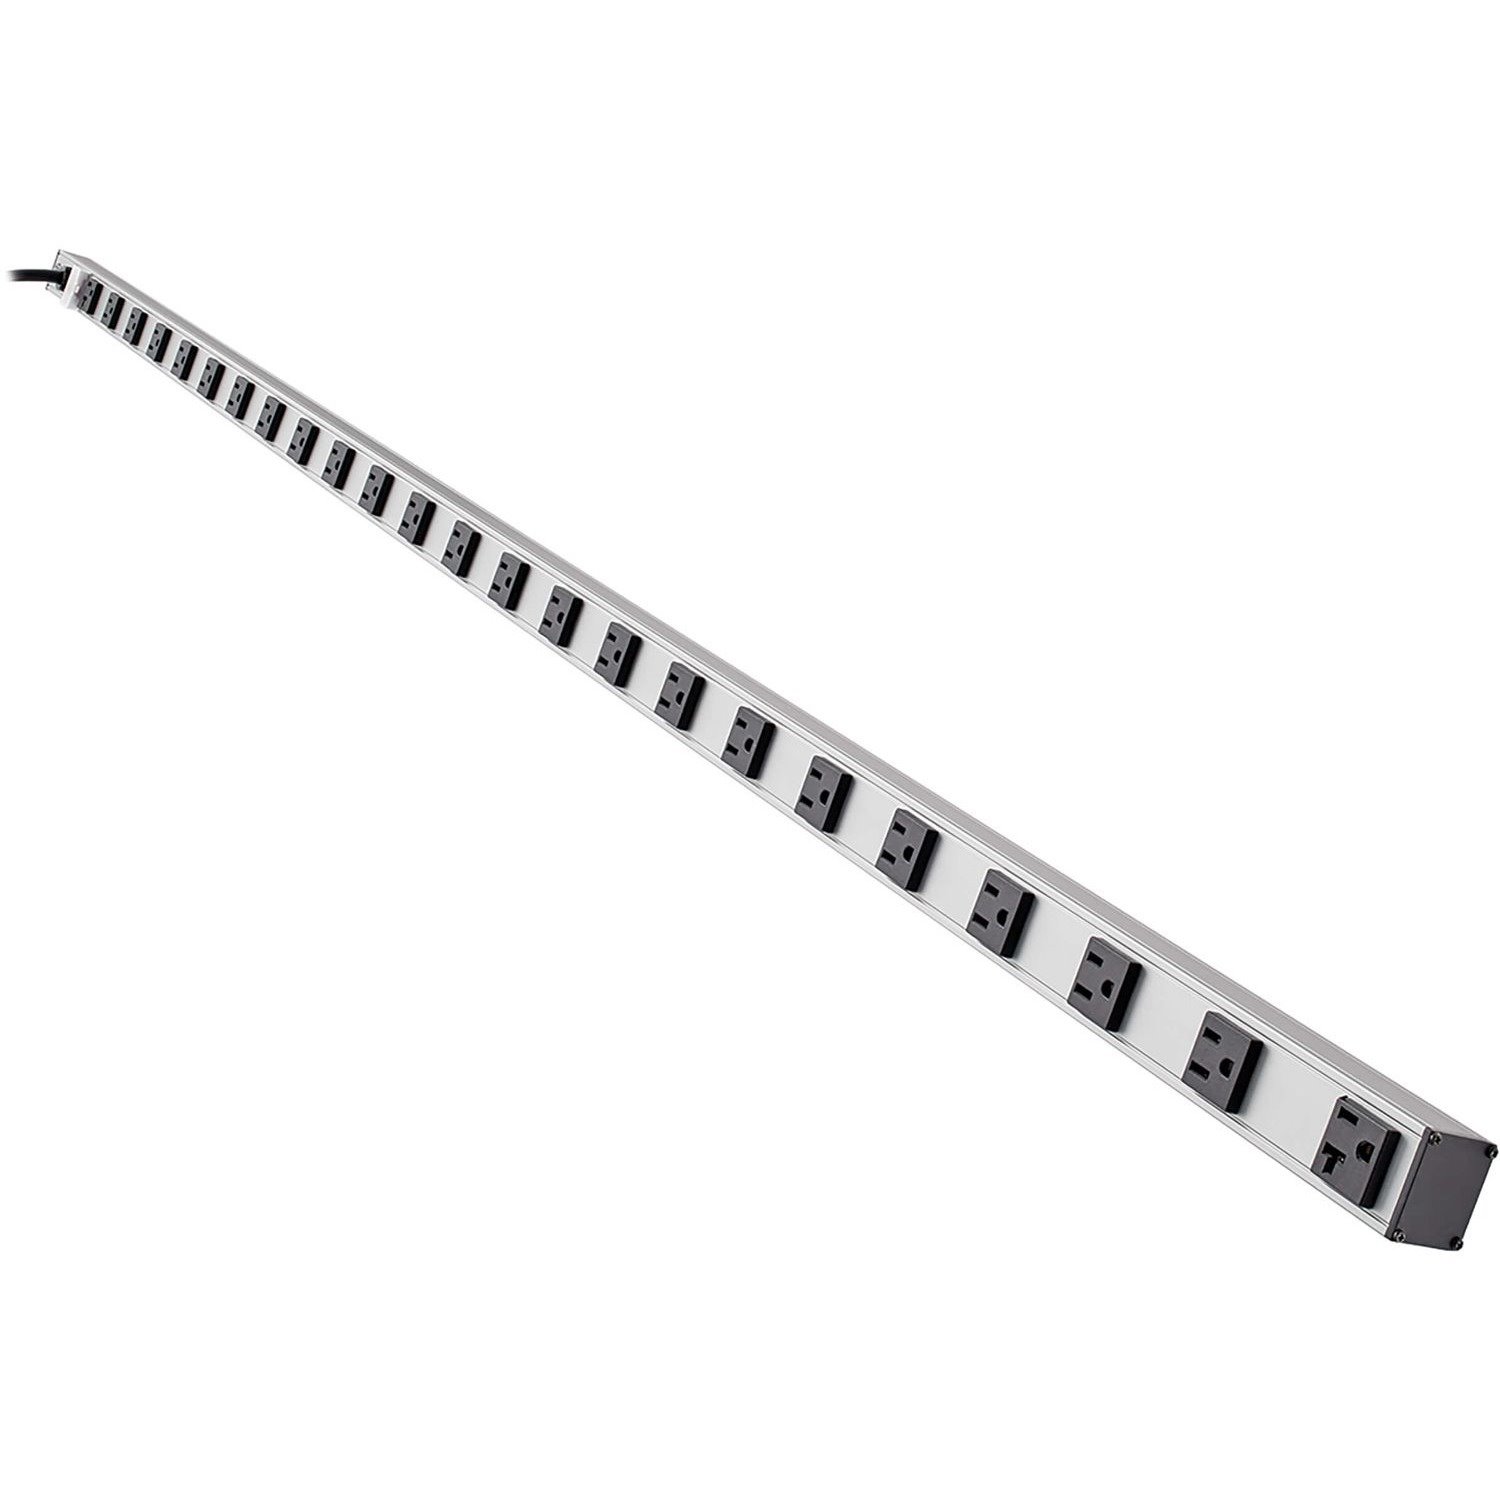 Tripp Lite by Eaton 24-Outlet Vertical Power Strip, 120V, 20A, L5-20P, 15 ft. (4.57 m) Cord, 72 in.